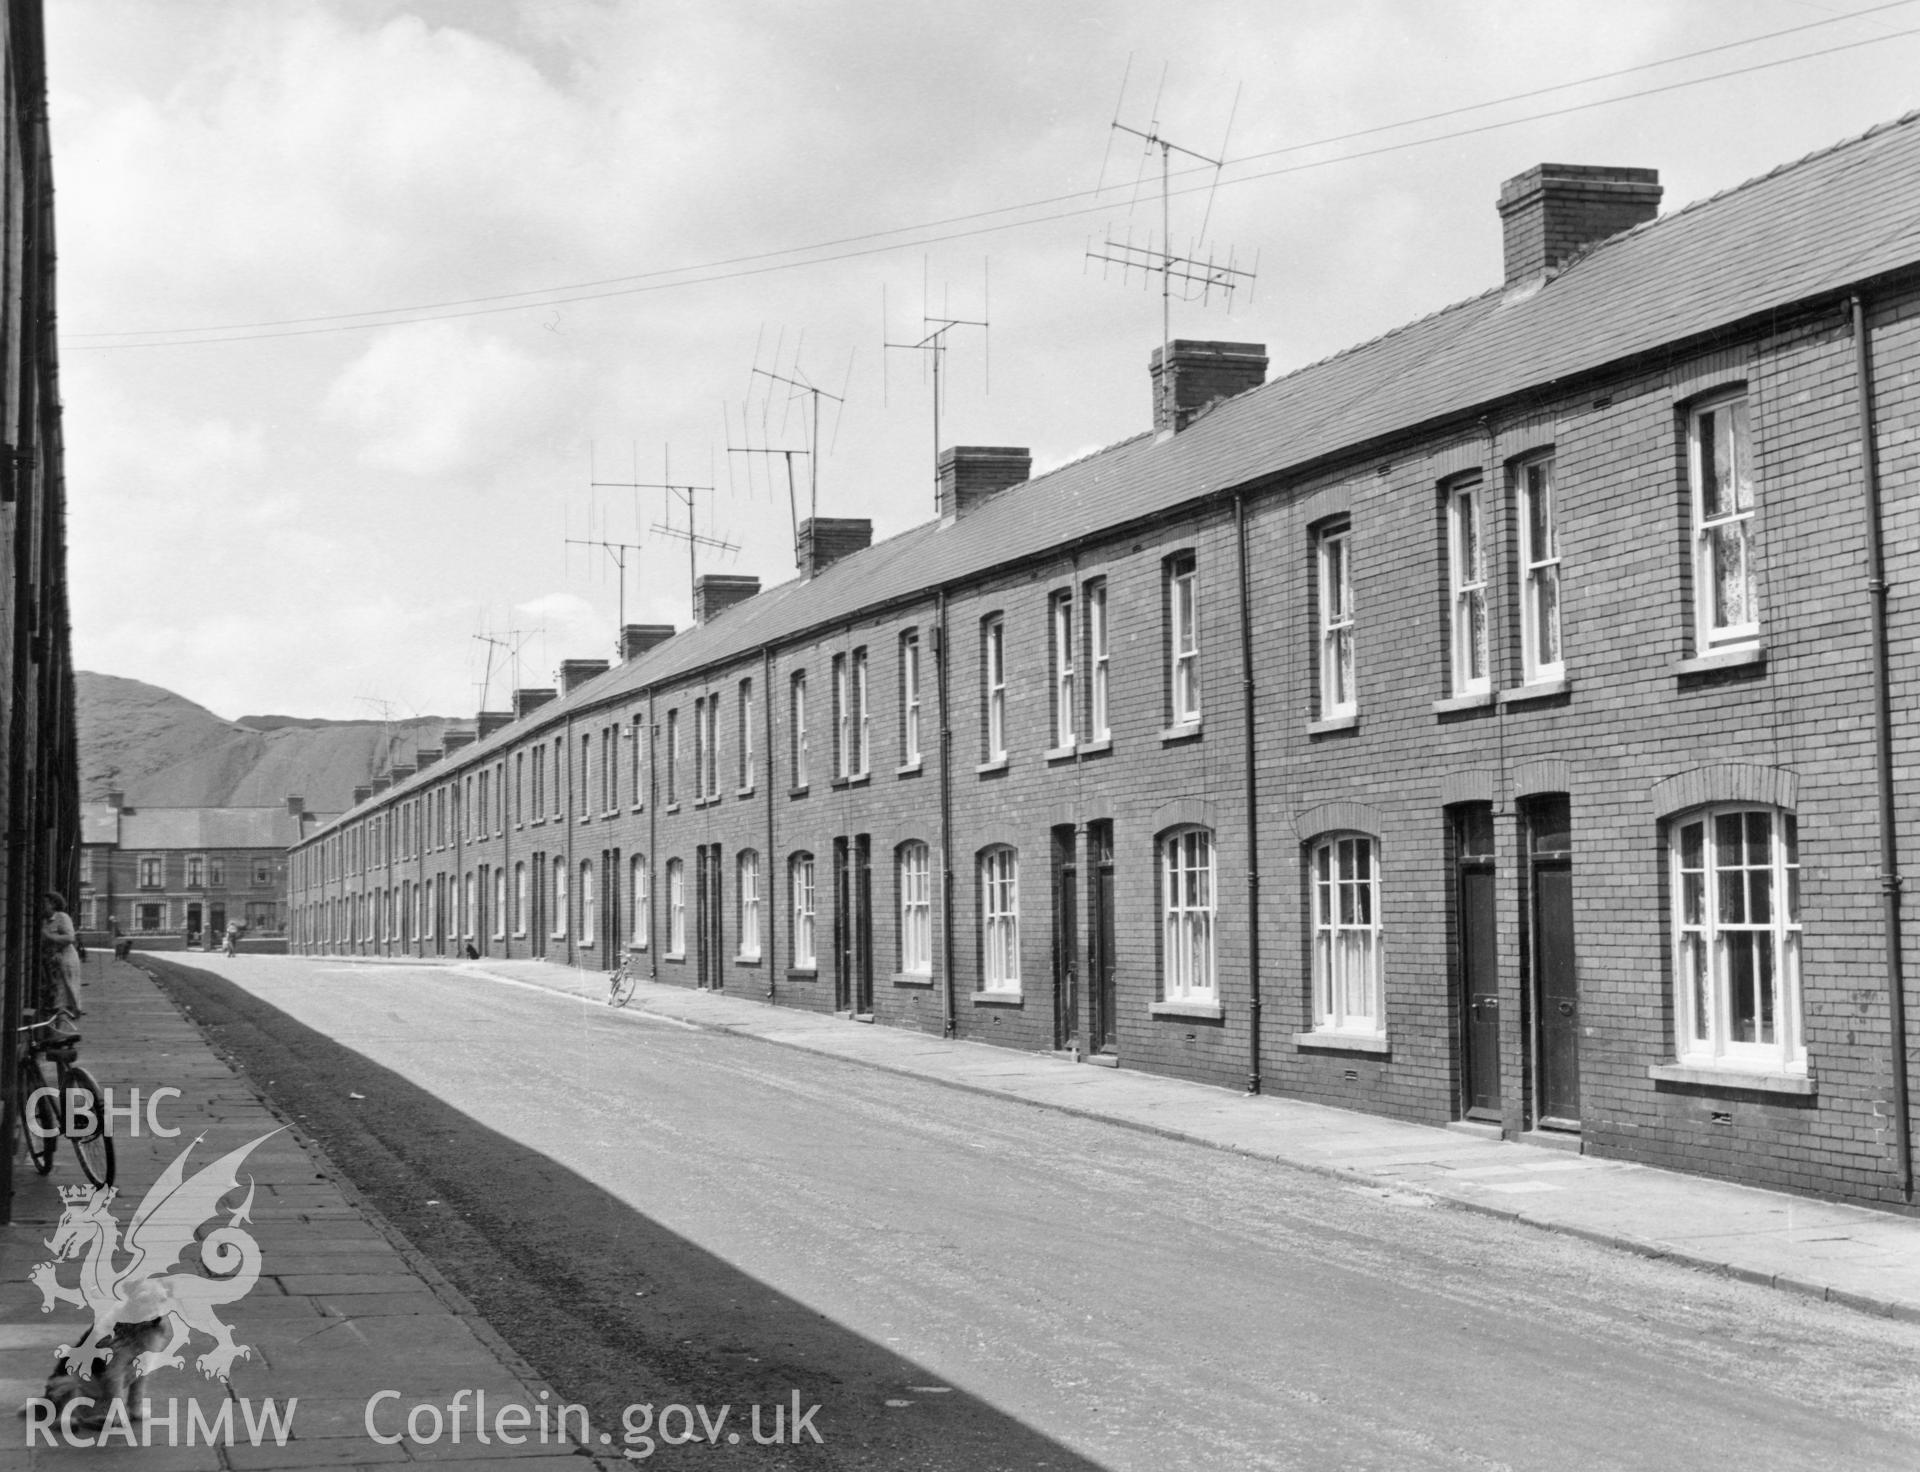 1 b/w print showing exterior of Council Street, Ebbw Vale, used as an illustration of the Housing Improvement Grant scheme for exhibitions held at Ministry of Housing stands at agricultural shows (1960); collated by the former Central Office of Information.